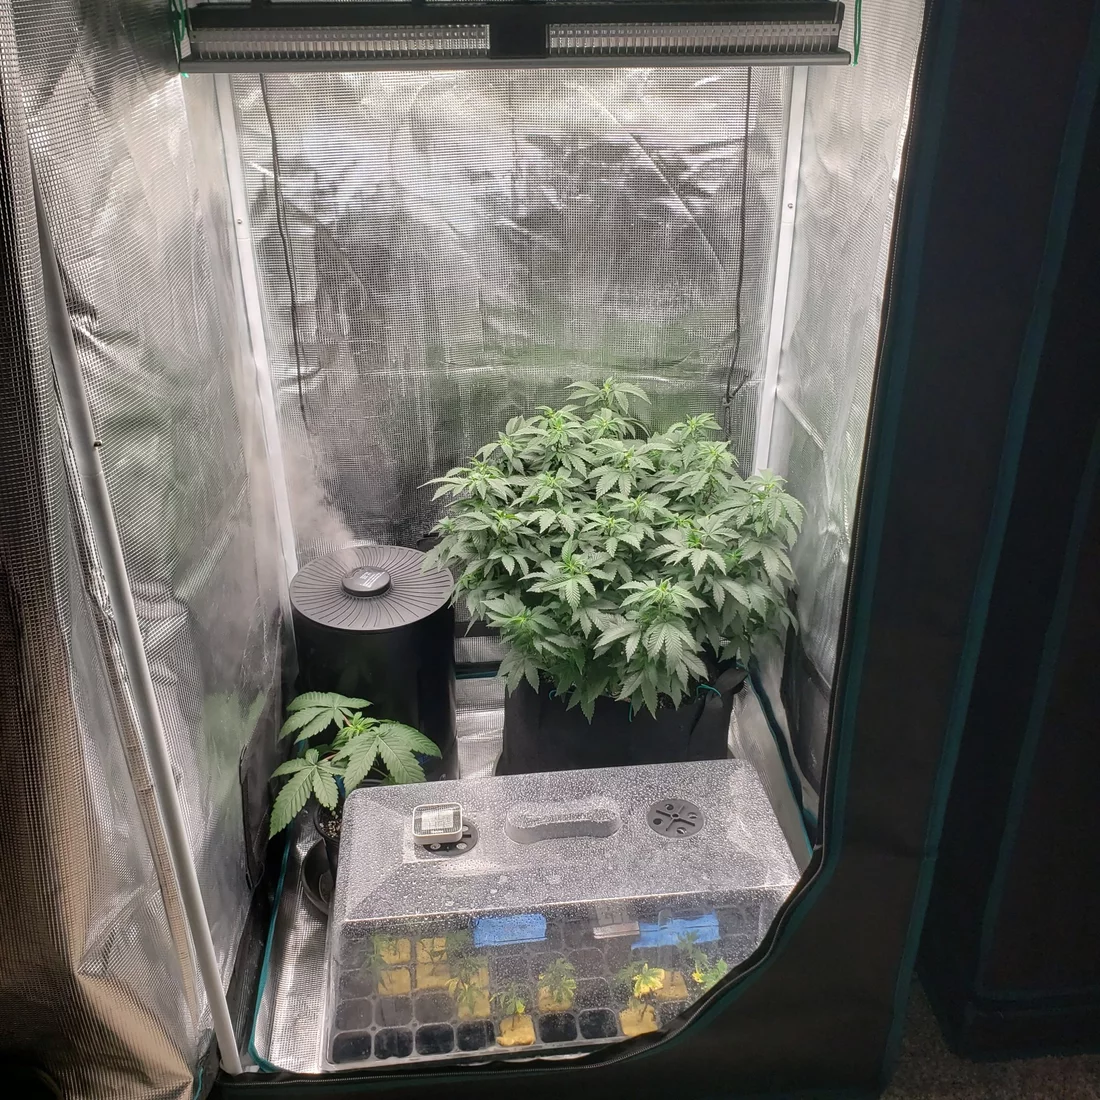 2x2 and 2x4 tent grow